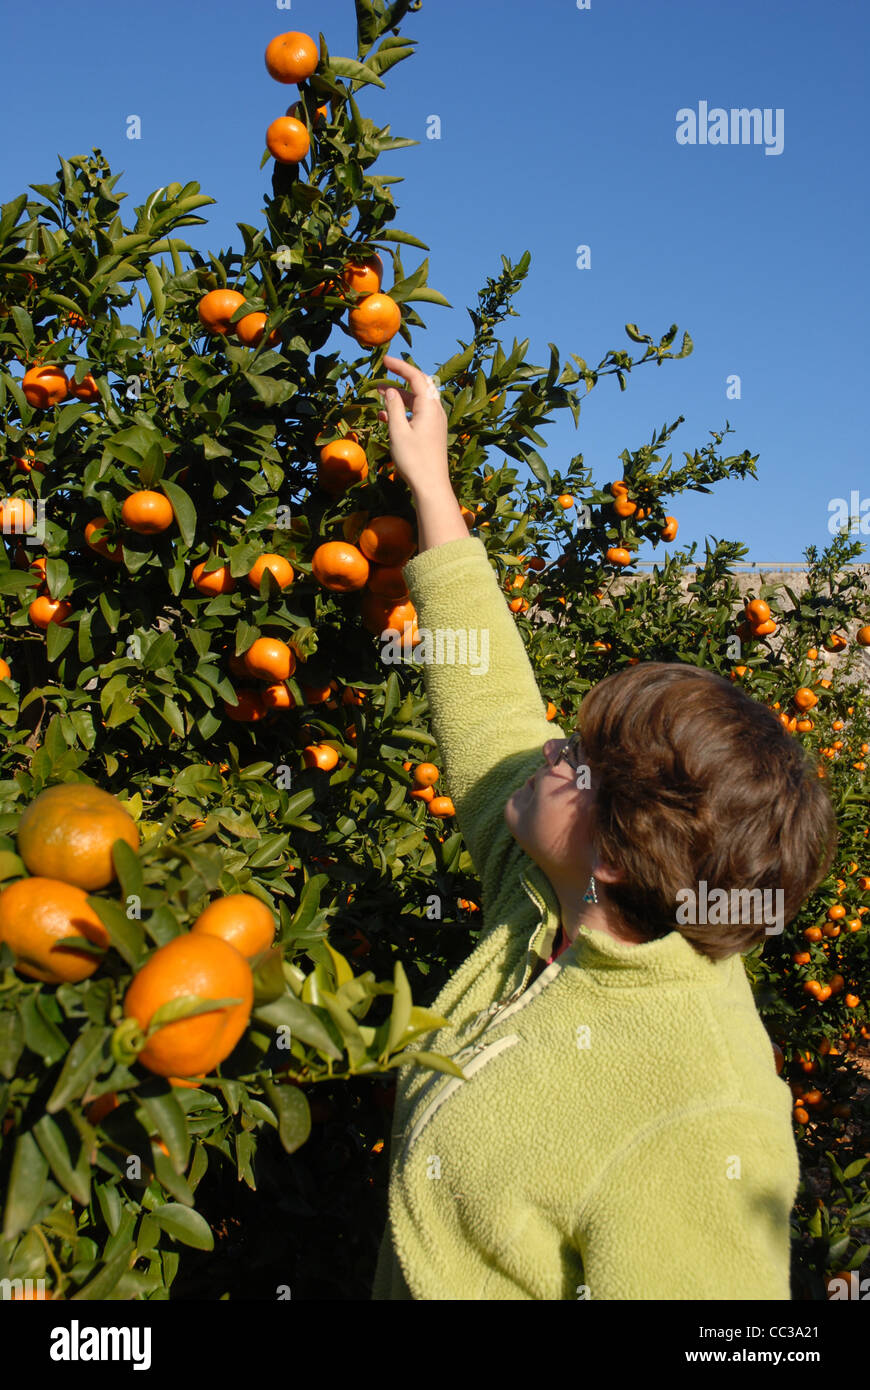 teenage girl picking ripe oranges from a tree, Pedreguer, Alicante Province, Comunidad Valencia, Spain Stock Photo